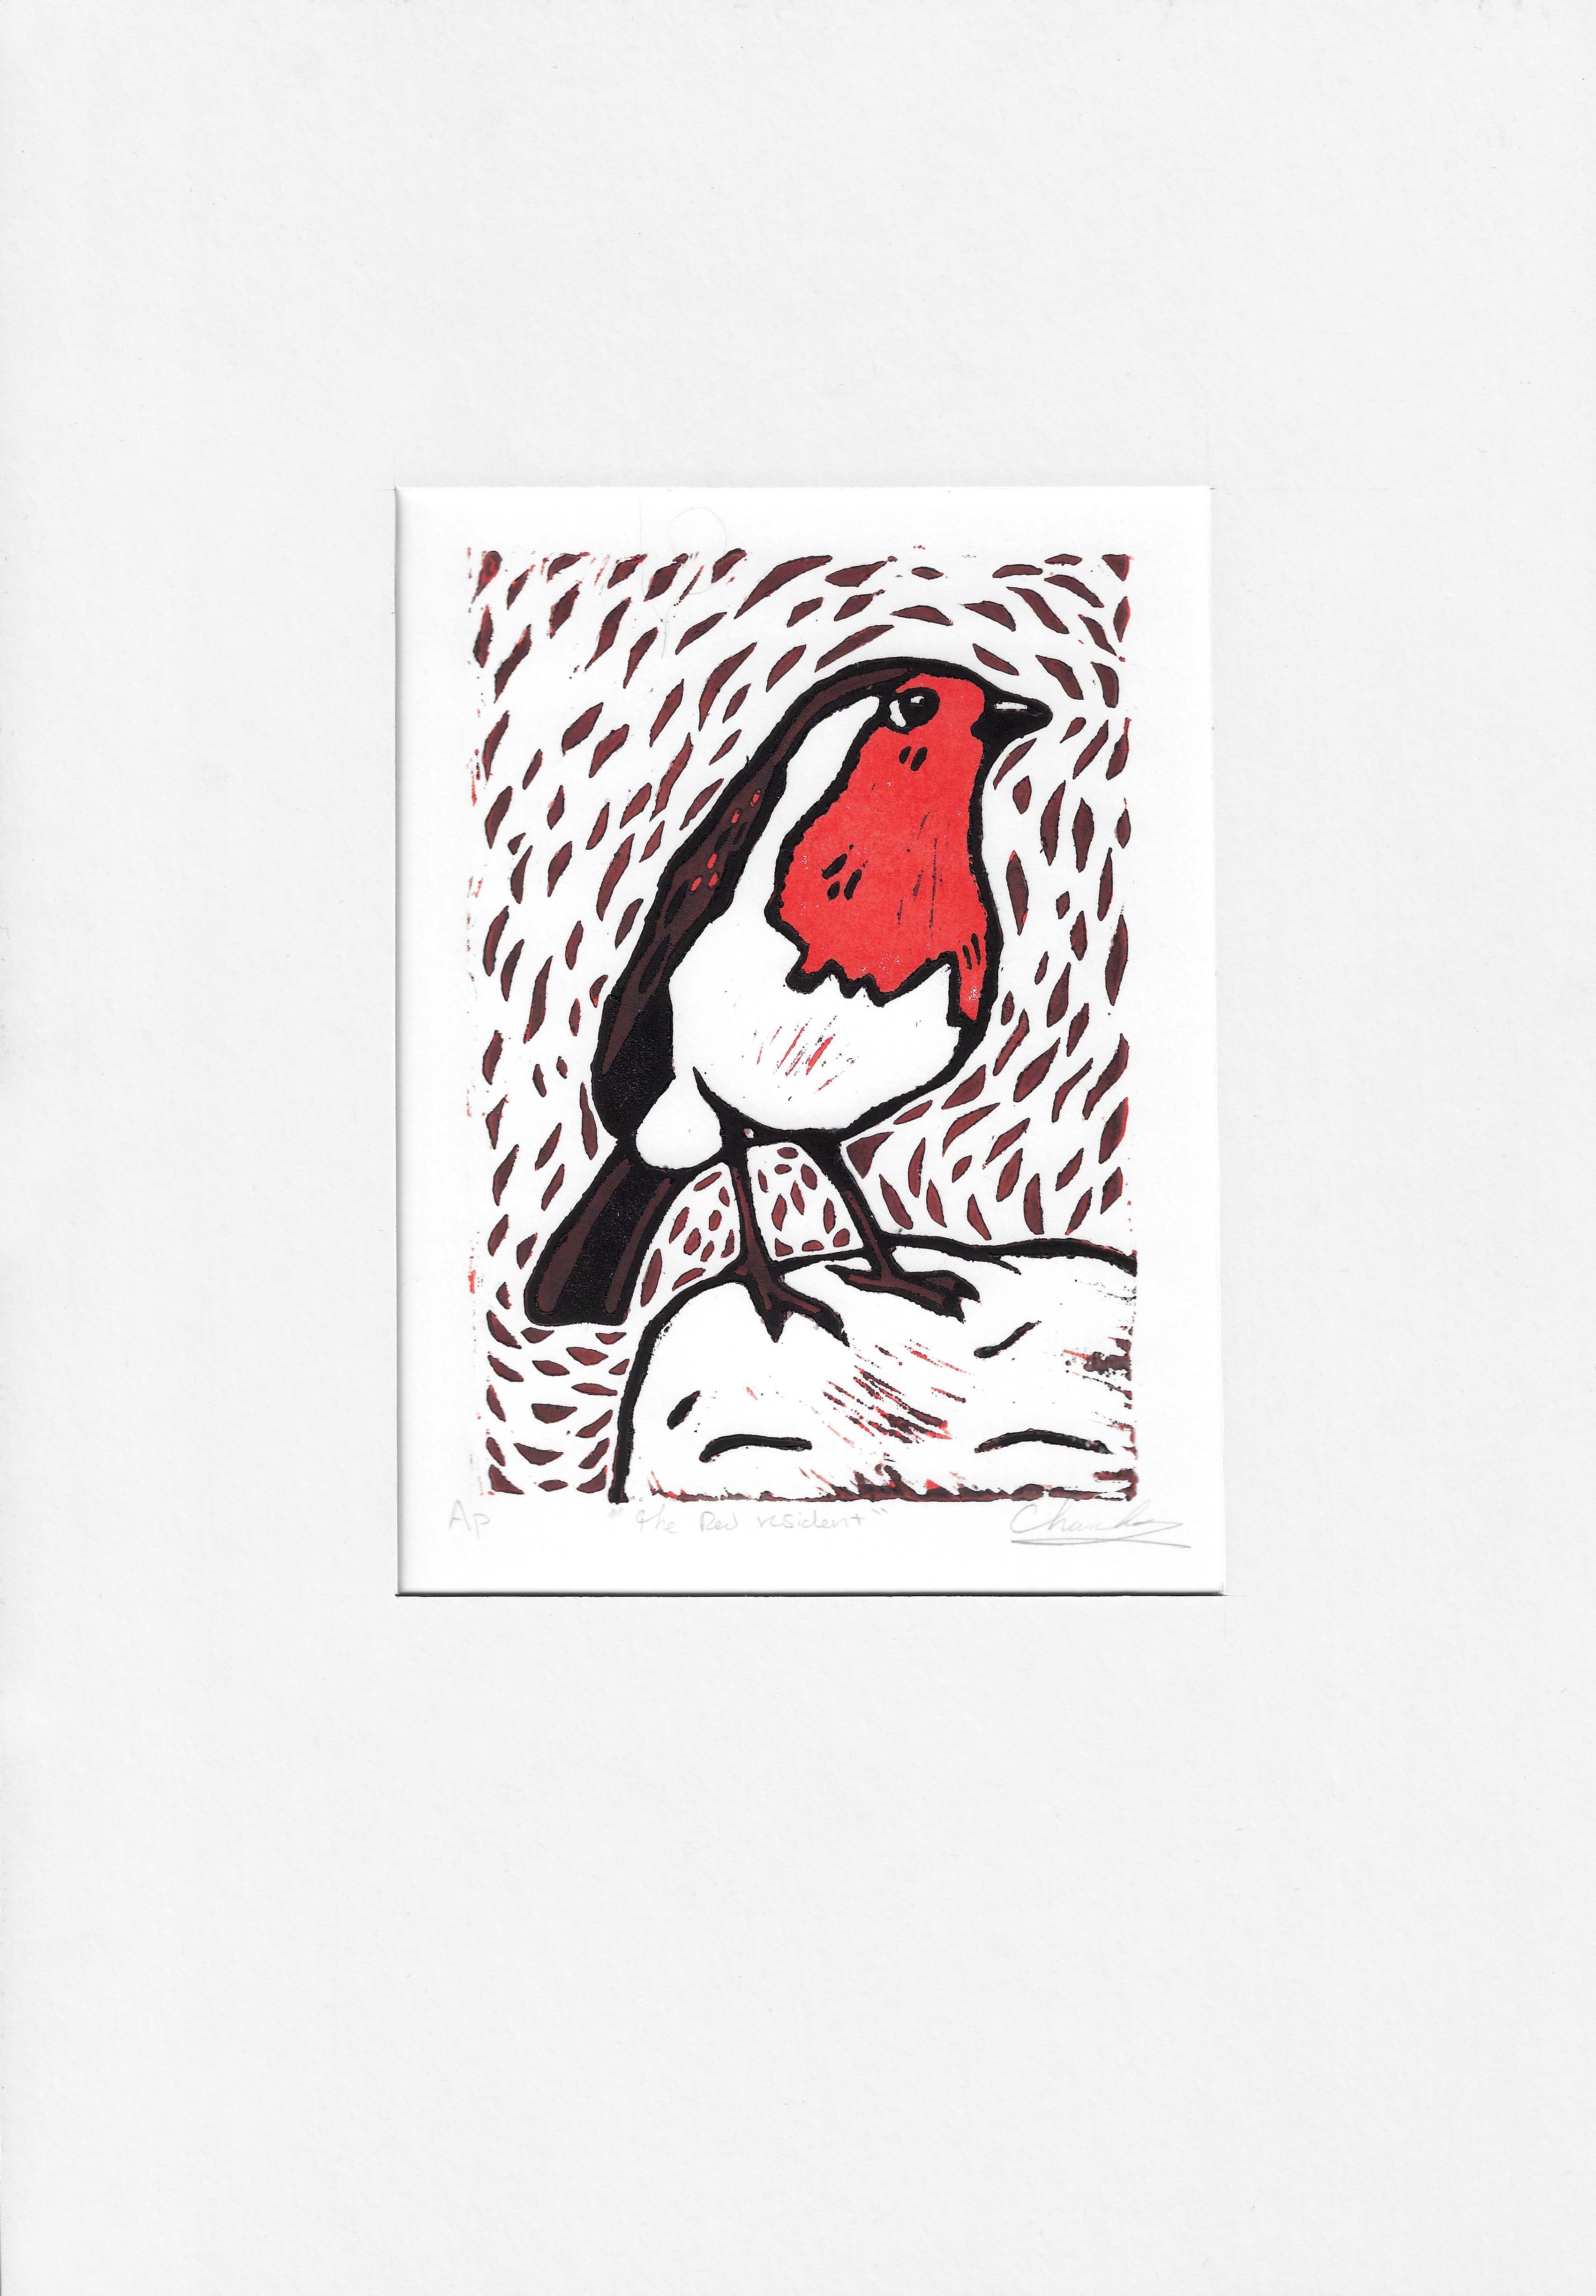 Colour reduction lino print of a Robin Redbreast.